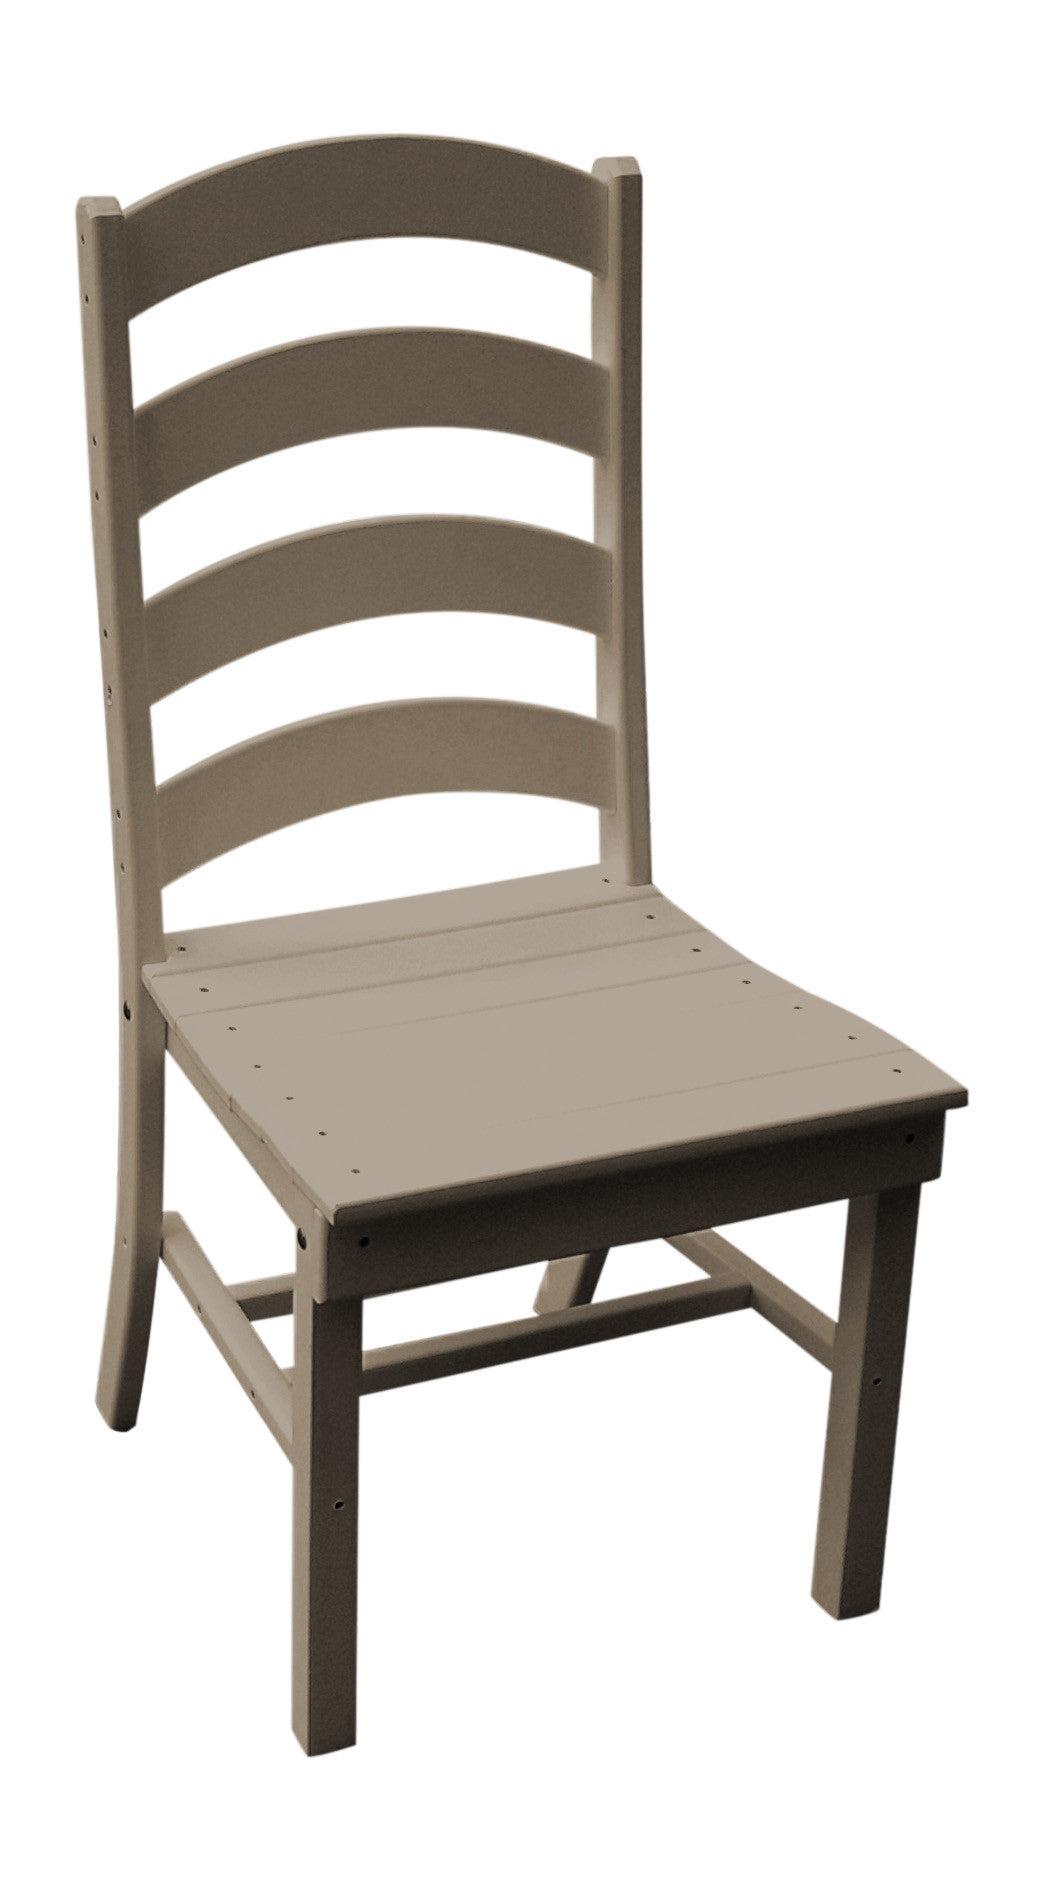 A&L Furniture Company Recycled Plastic Ladderback Dining Chair - Weatheredwood